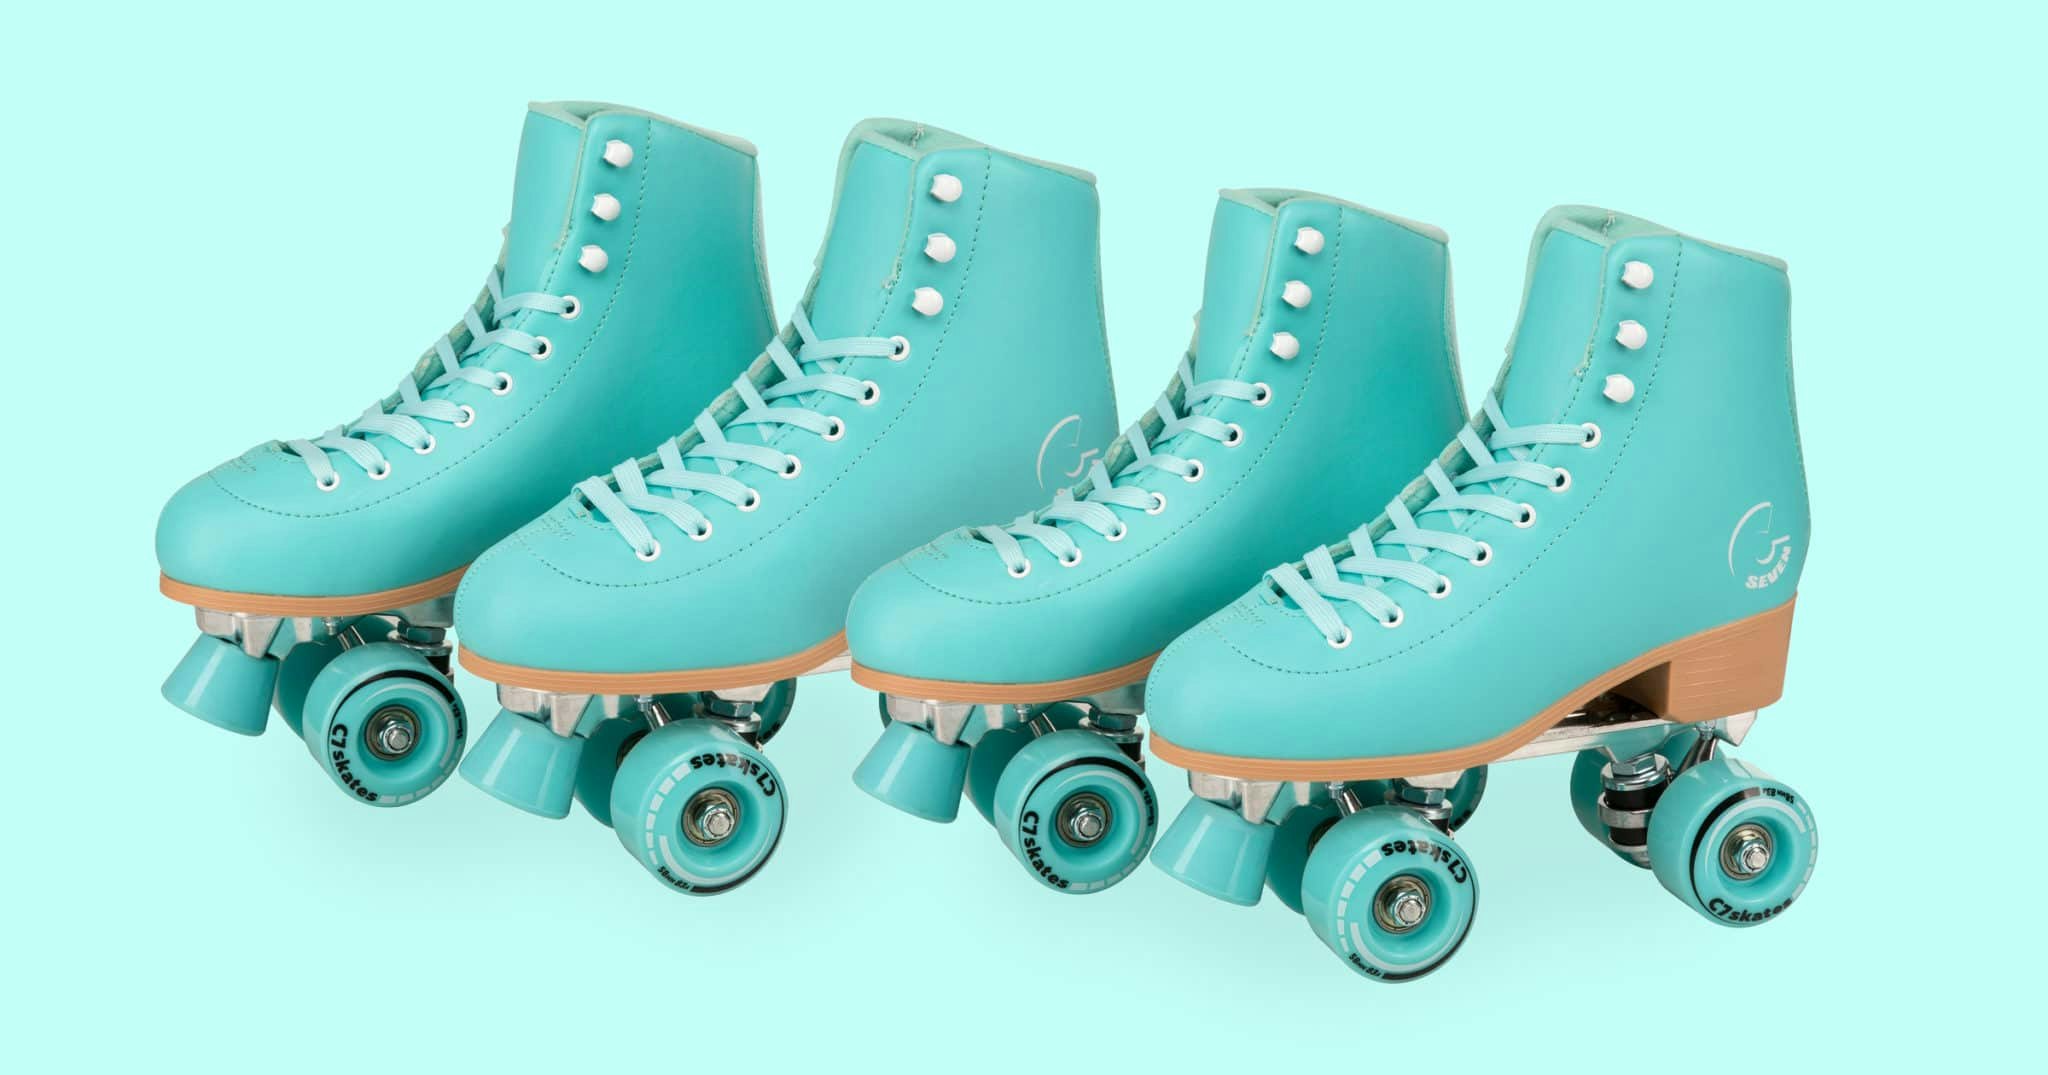 10 Roller Skates That Prove Summer's Biggest Trend Is For Moms Too